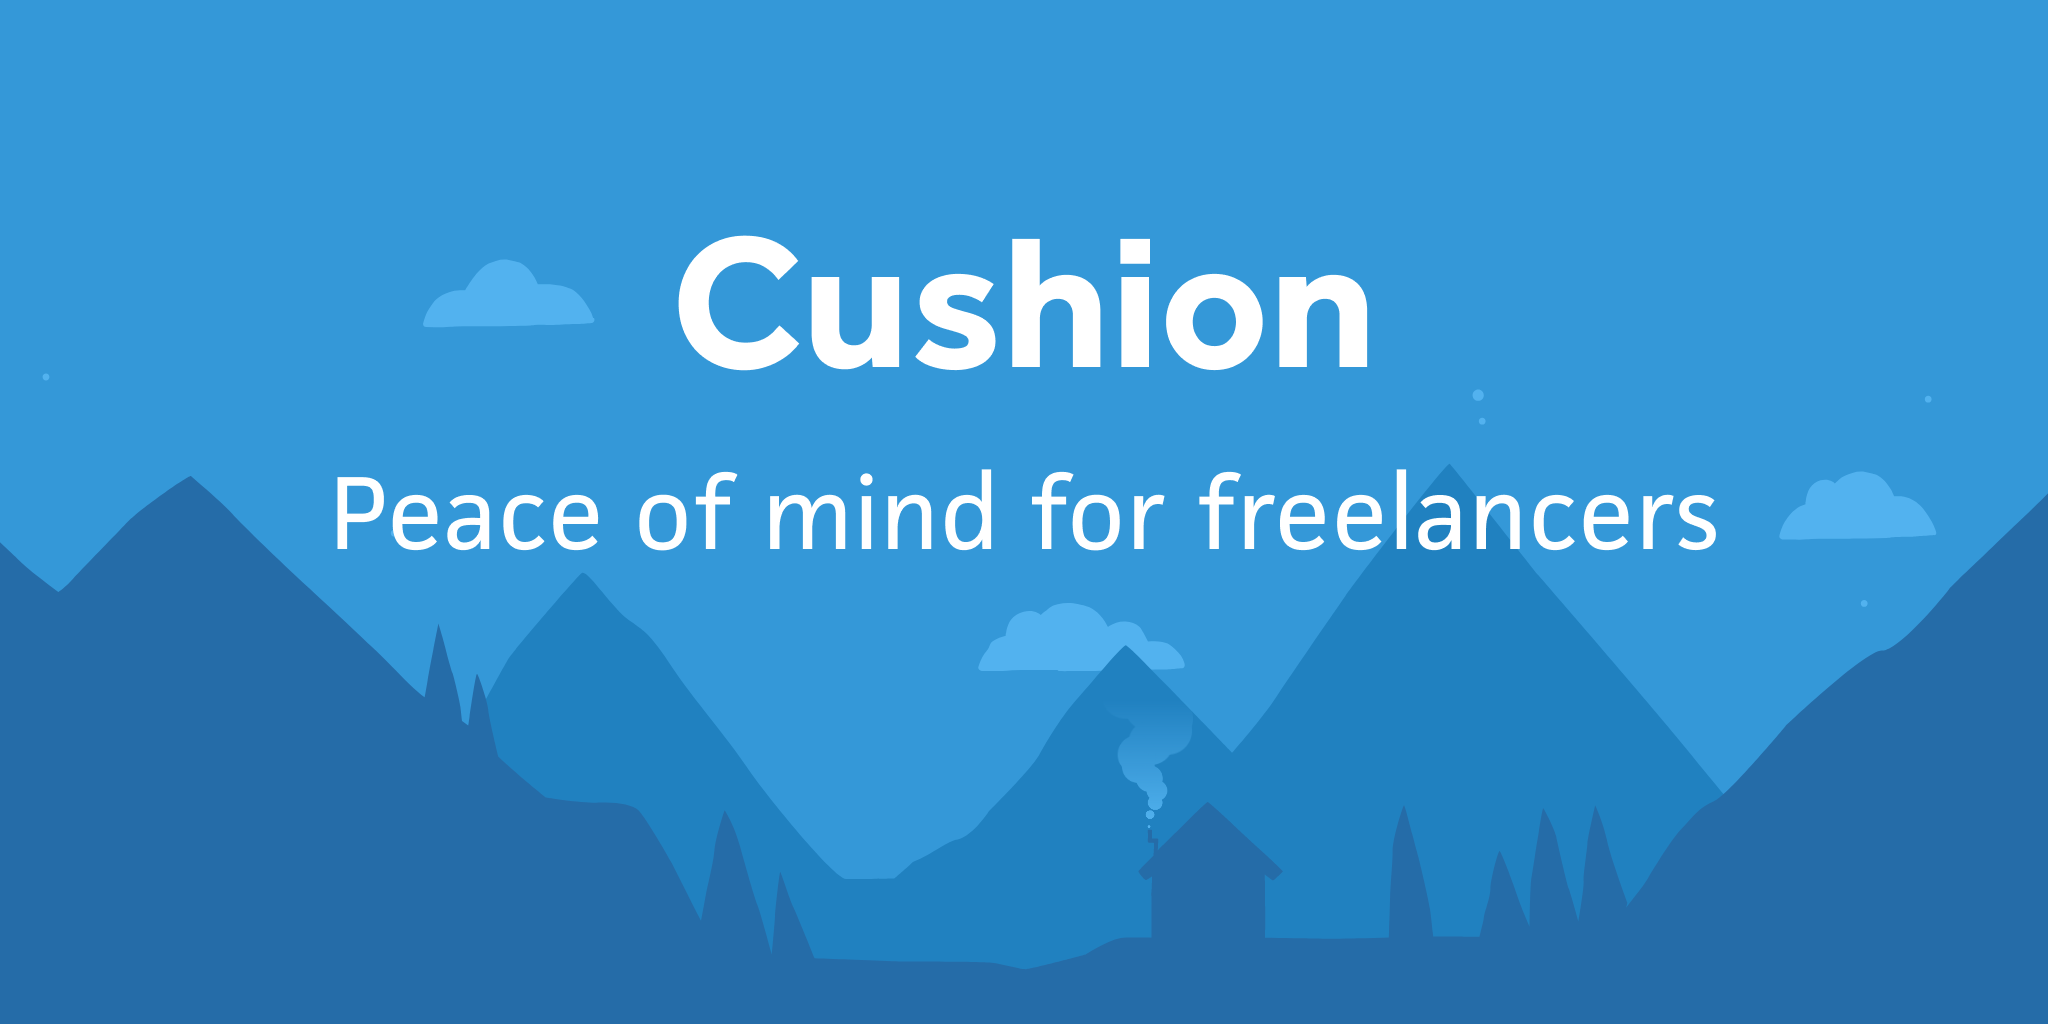 Cushion was built out of a need for a less stressful freelance life. Its aim is to provide better insight and awareness, so the roller coaster ride of